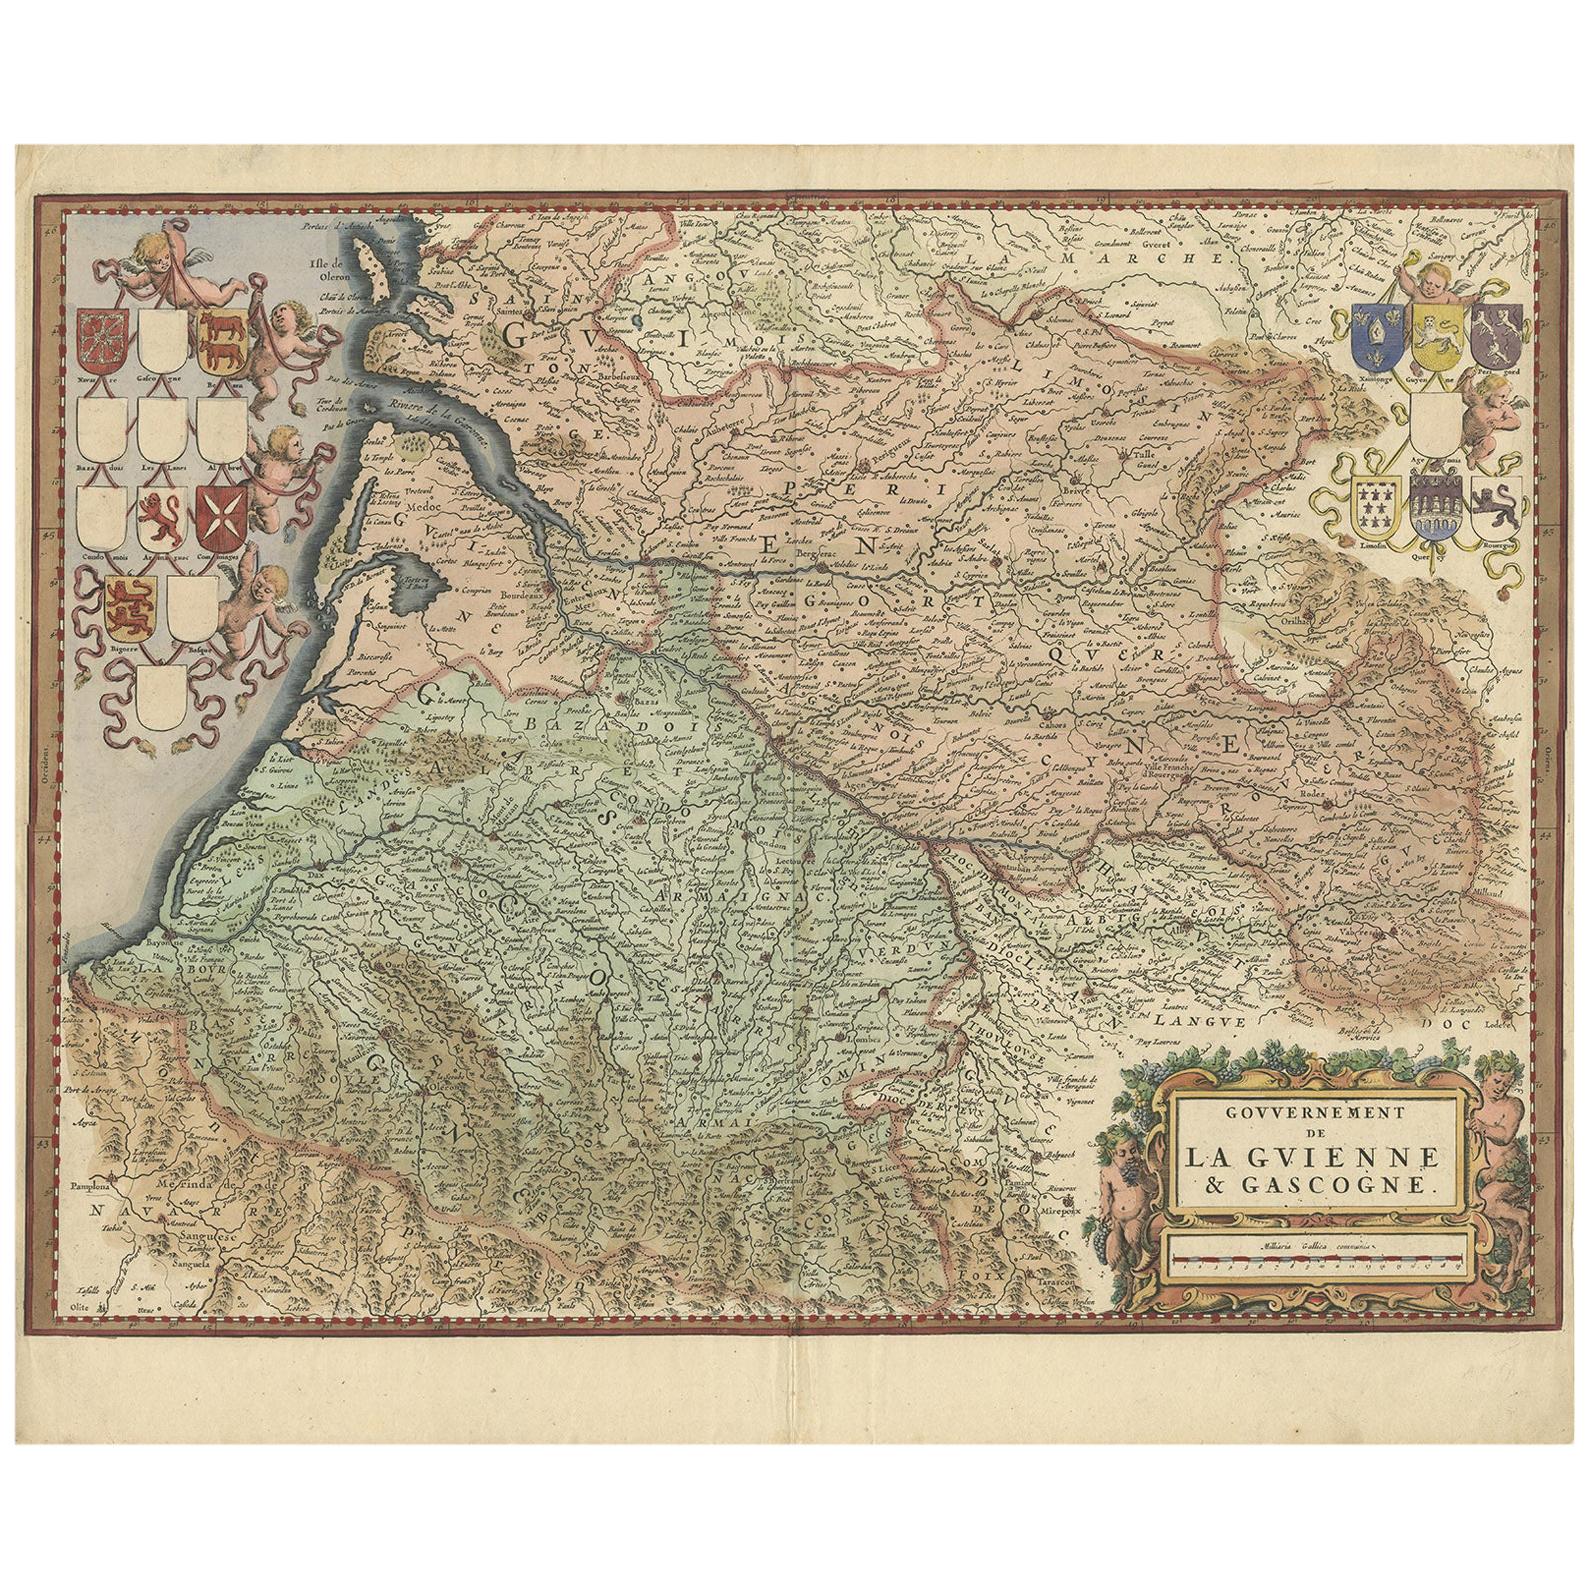 Treasures Cartographiques: A Journey Through the Gascogne and Guyenne Regions, 1680